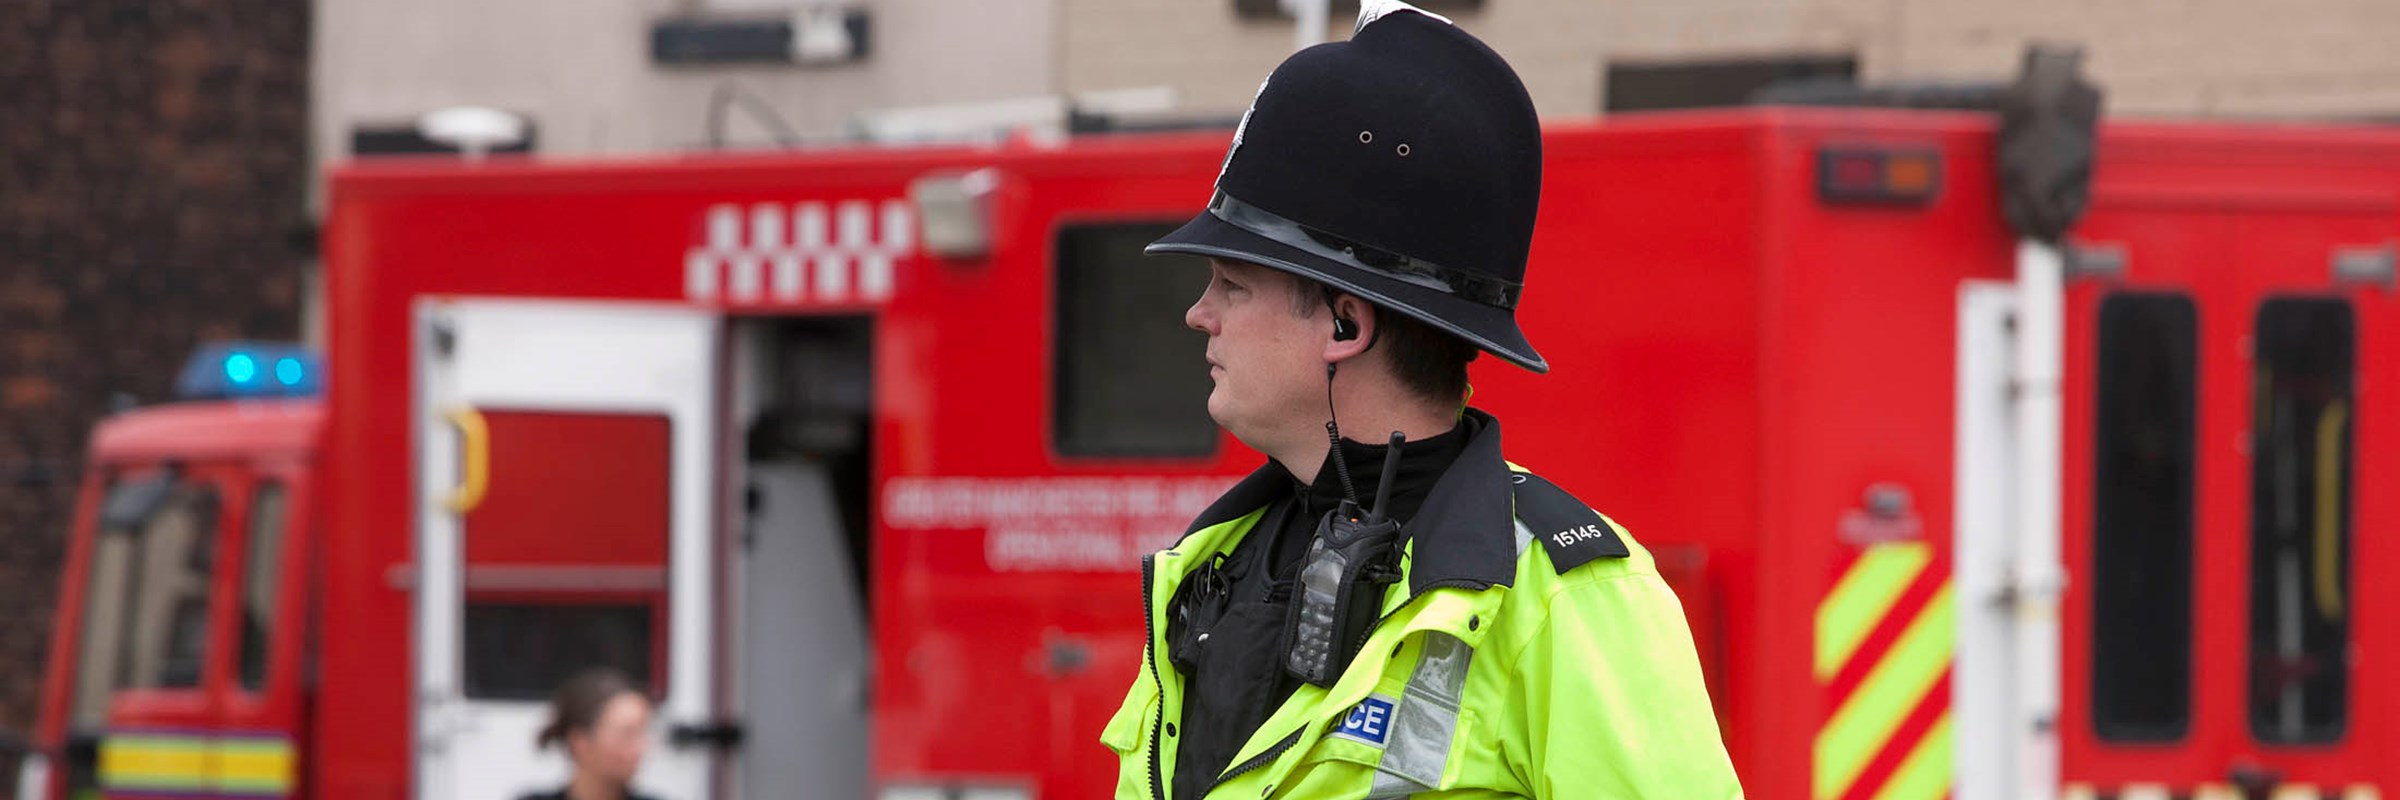 Police officer in high-vis coat stands in front of fire engine